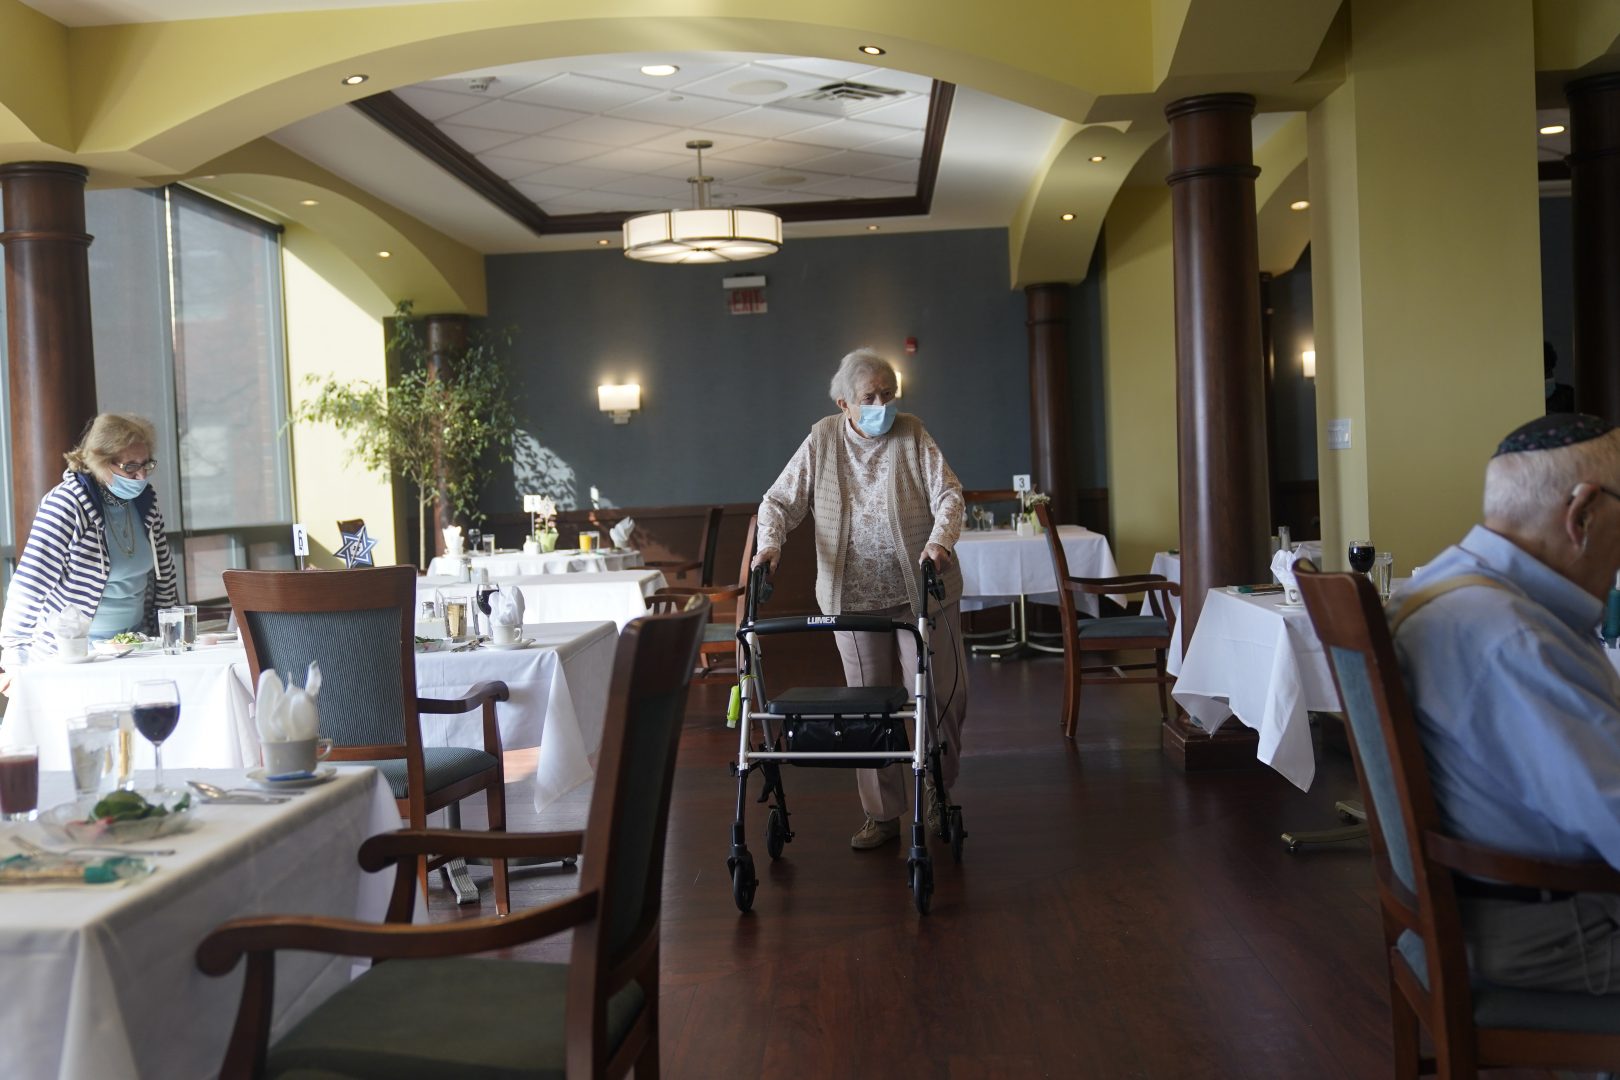 FILE PHOTO: In this April 1, 2021, file photo May Nast arrives for dinner at RiverWalk, an independent senior housing facility, in New York.